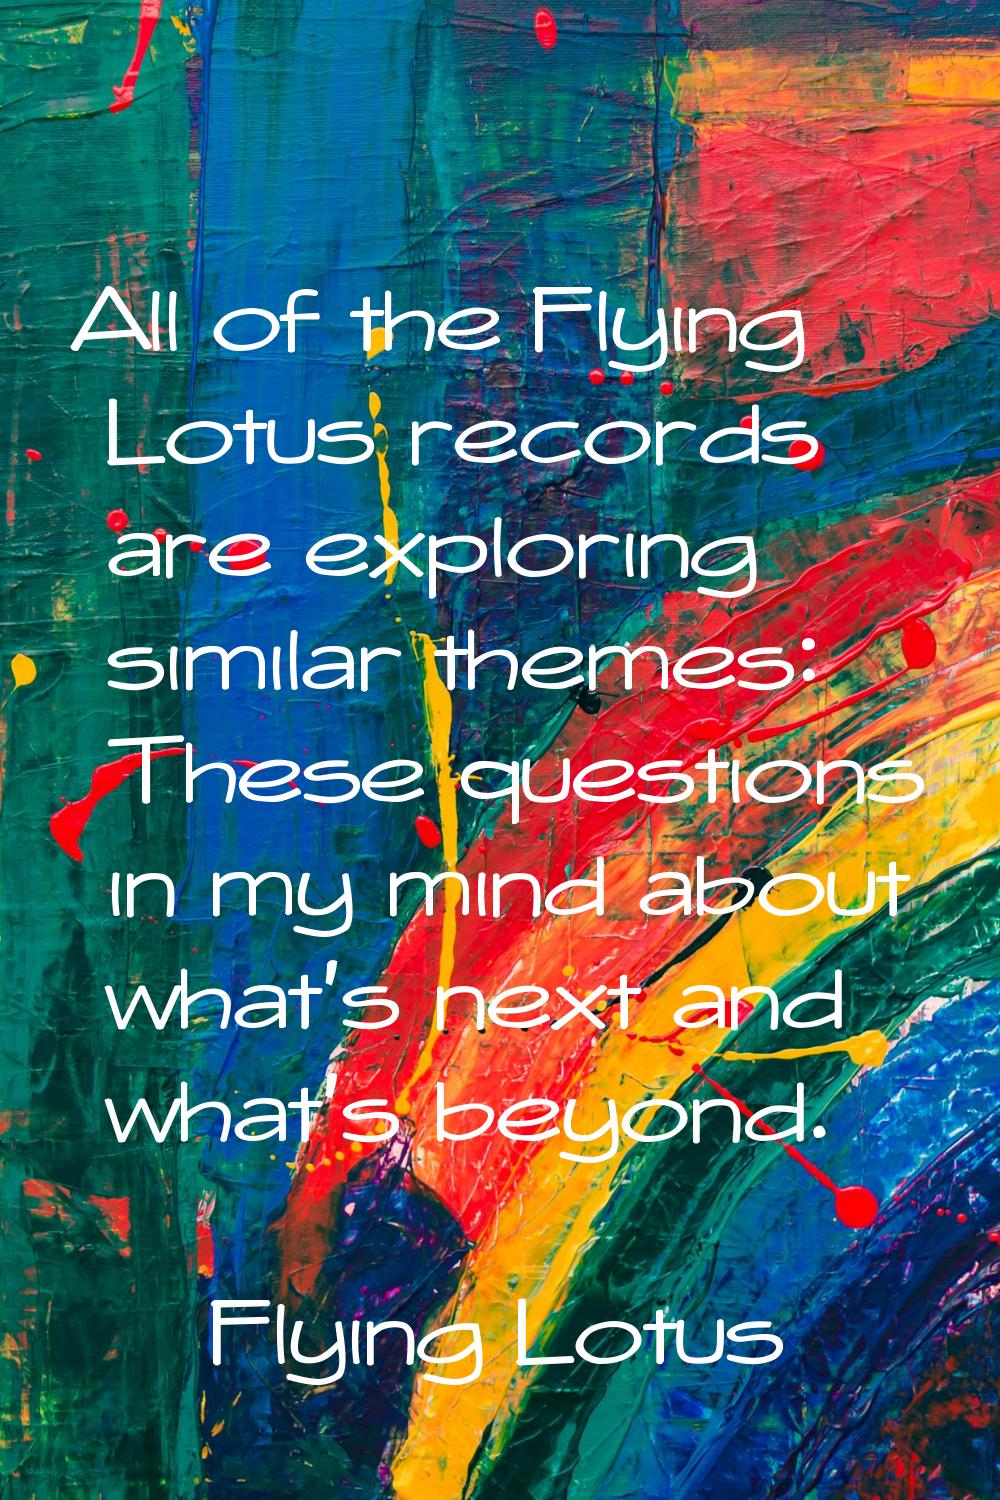 All of the Flying Lotus records are exploring similar themes: These questions in my mind about what